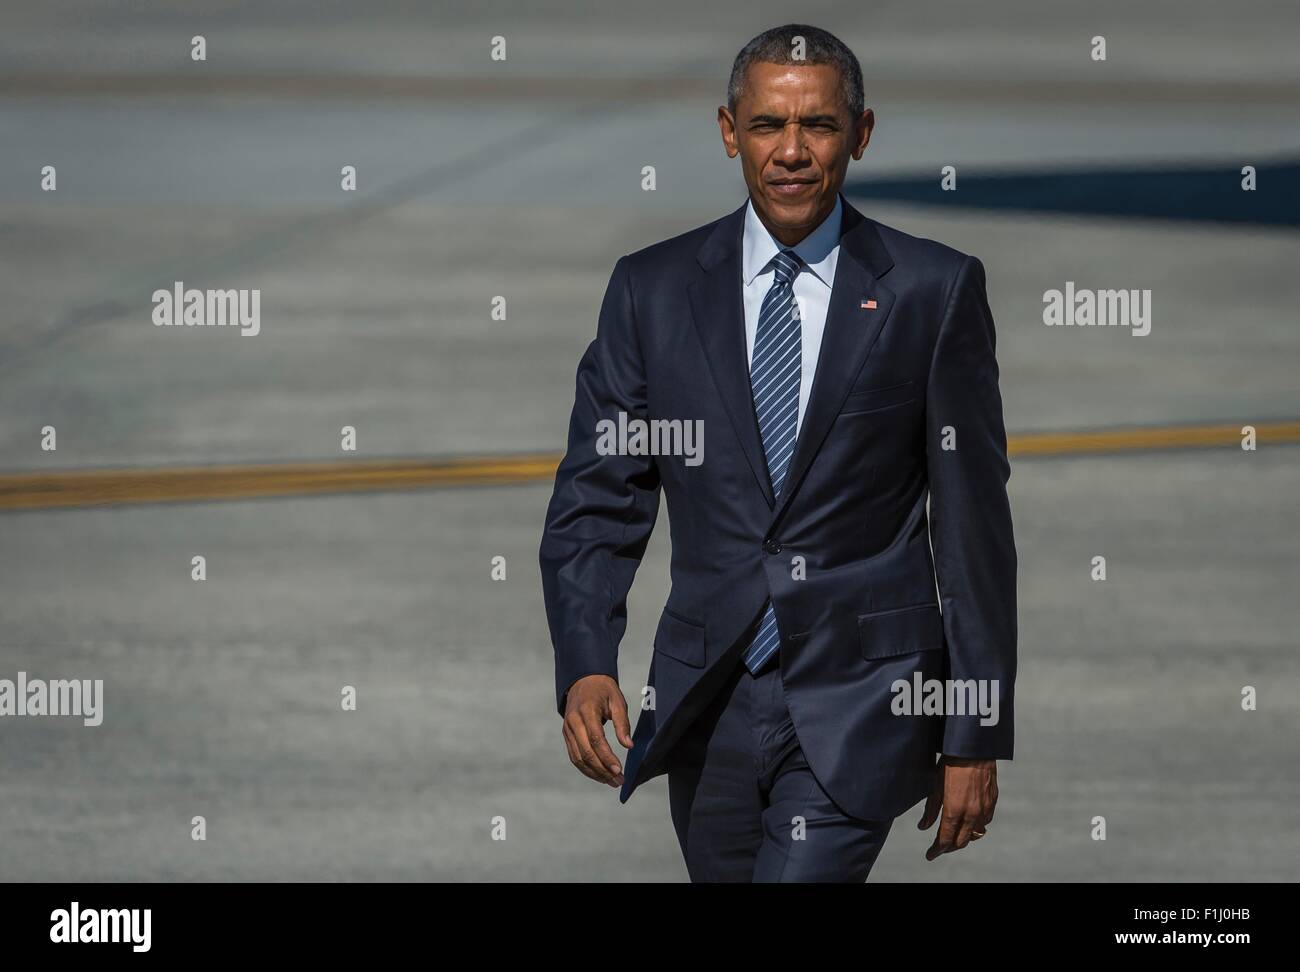 U.S. President Barack Obama arrives at Joint Base Elmendorf-Richardson to speak at the Conference on Global Leadership in the Arctic and visit the state August 31, 2015 in Anchorage, Alaska. The GLACIER conference deals with urgent issues facing the Arctic. Stock Photo